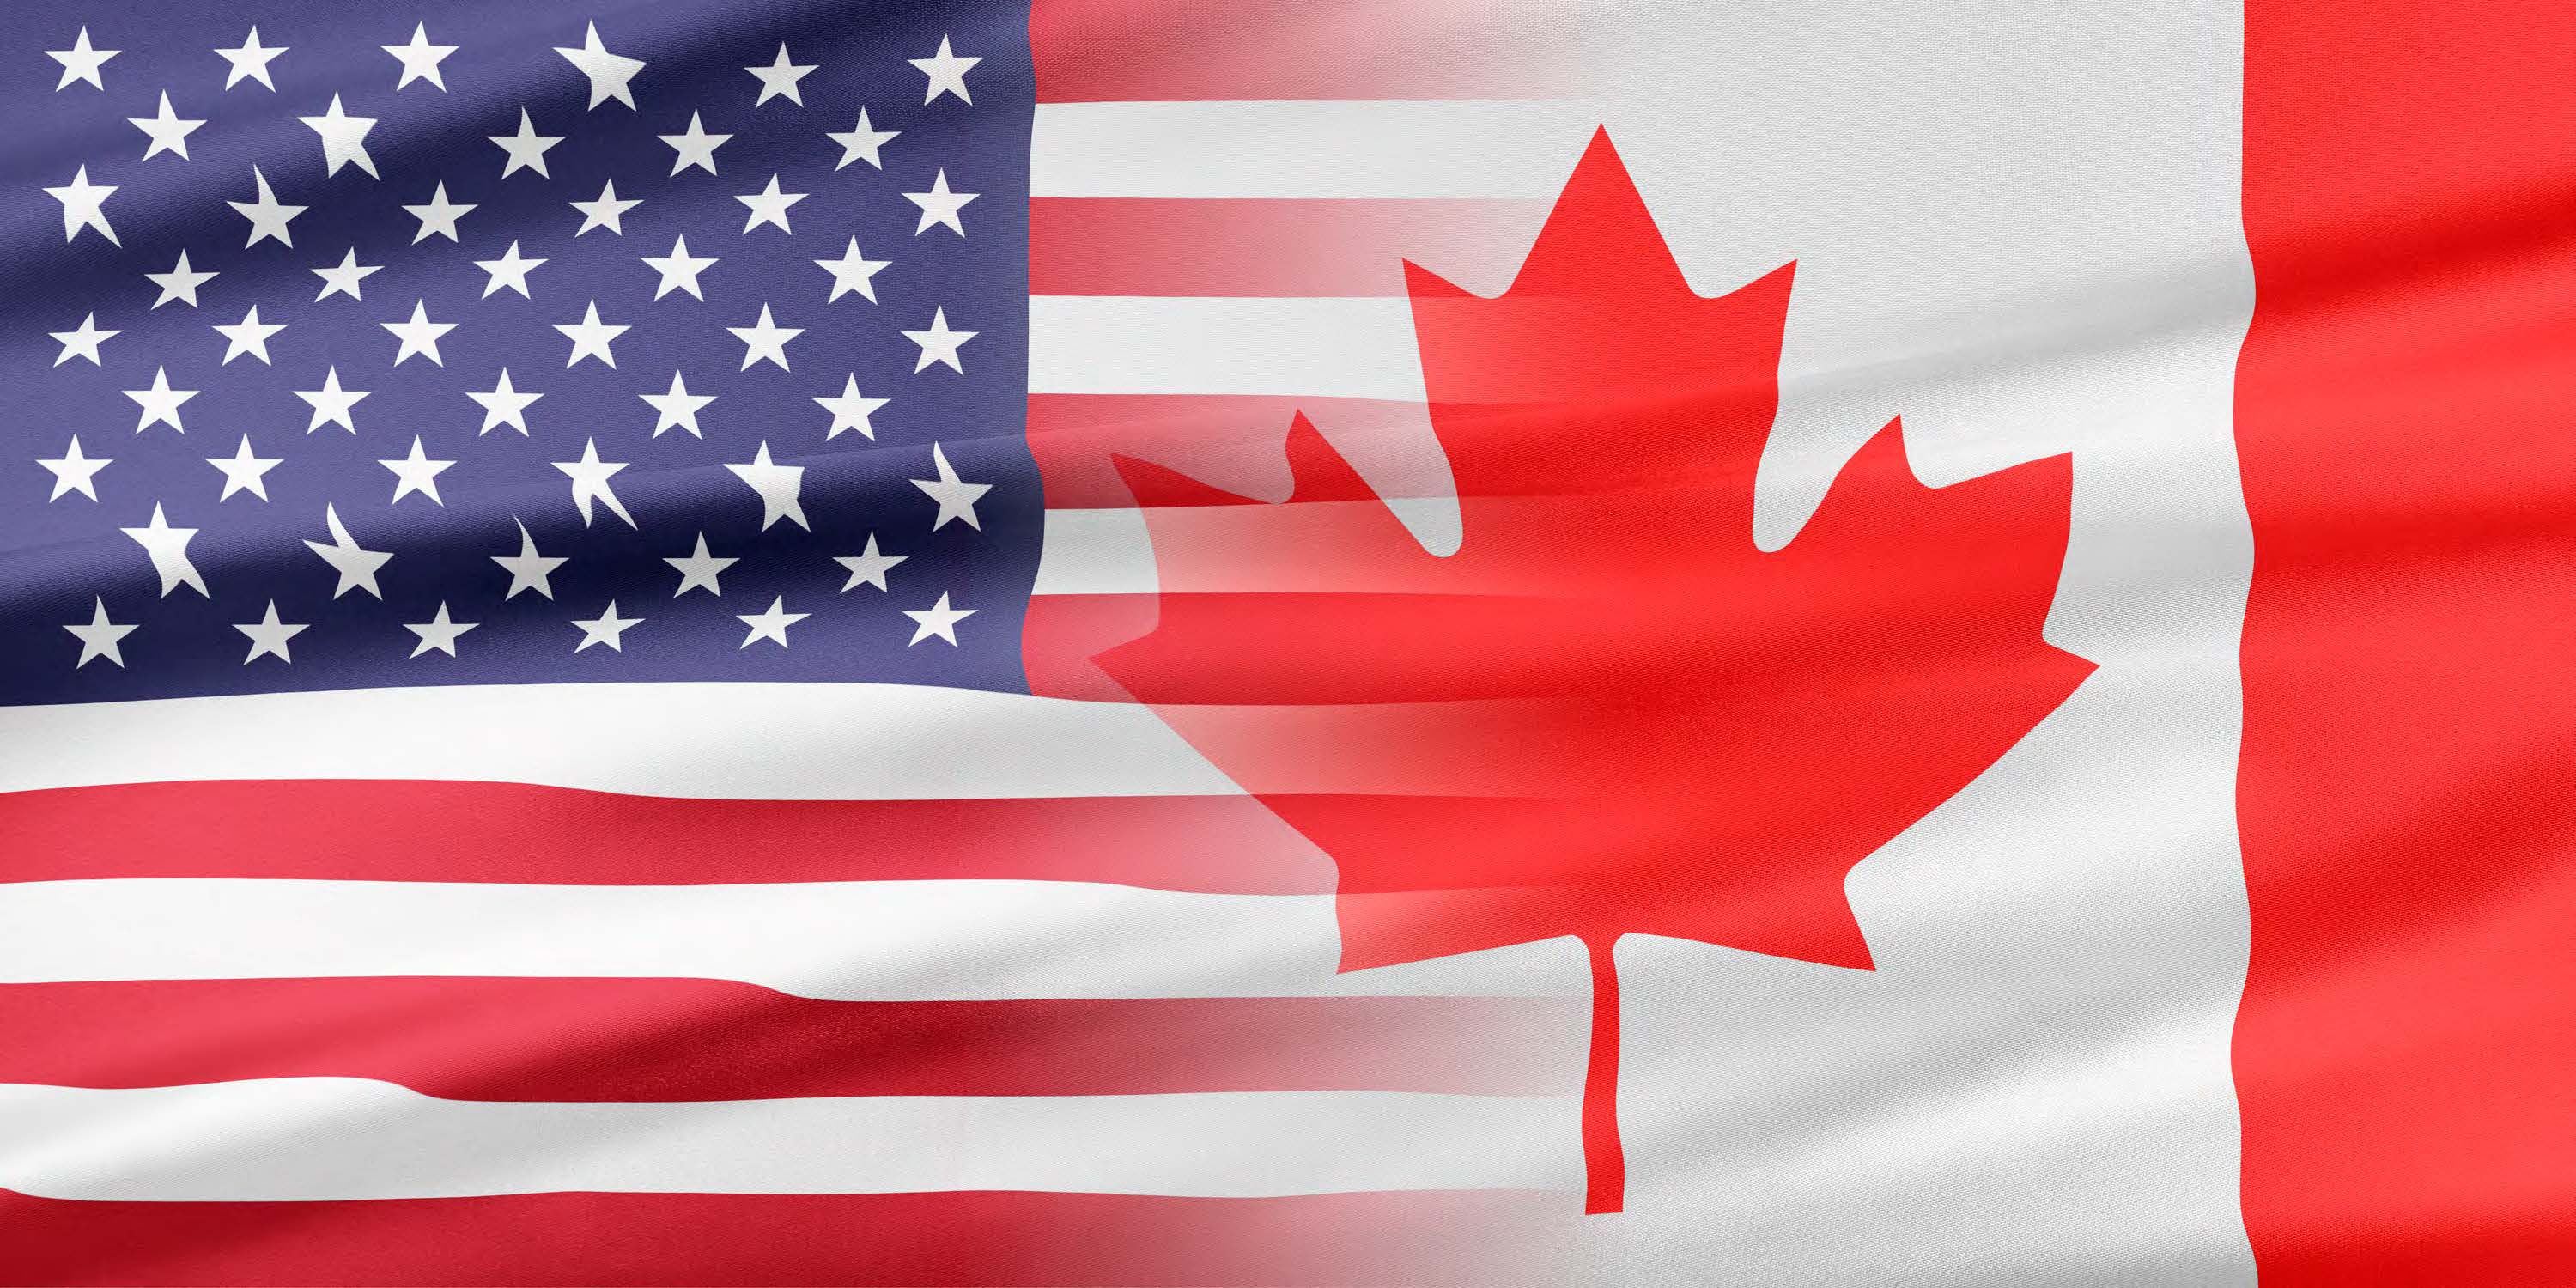 United States and Canadian Flags joining together